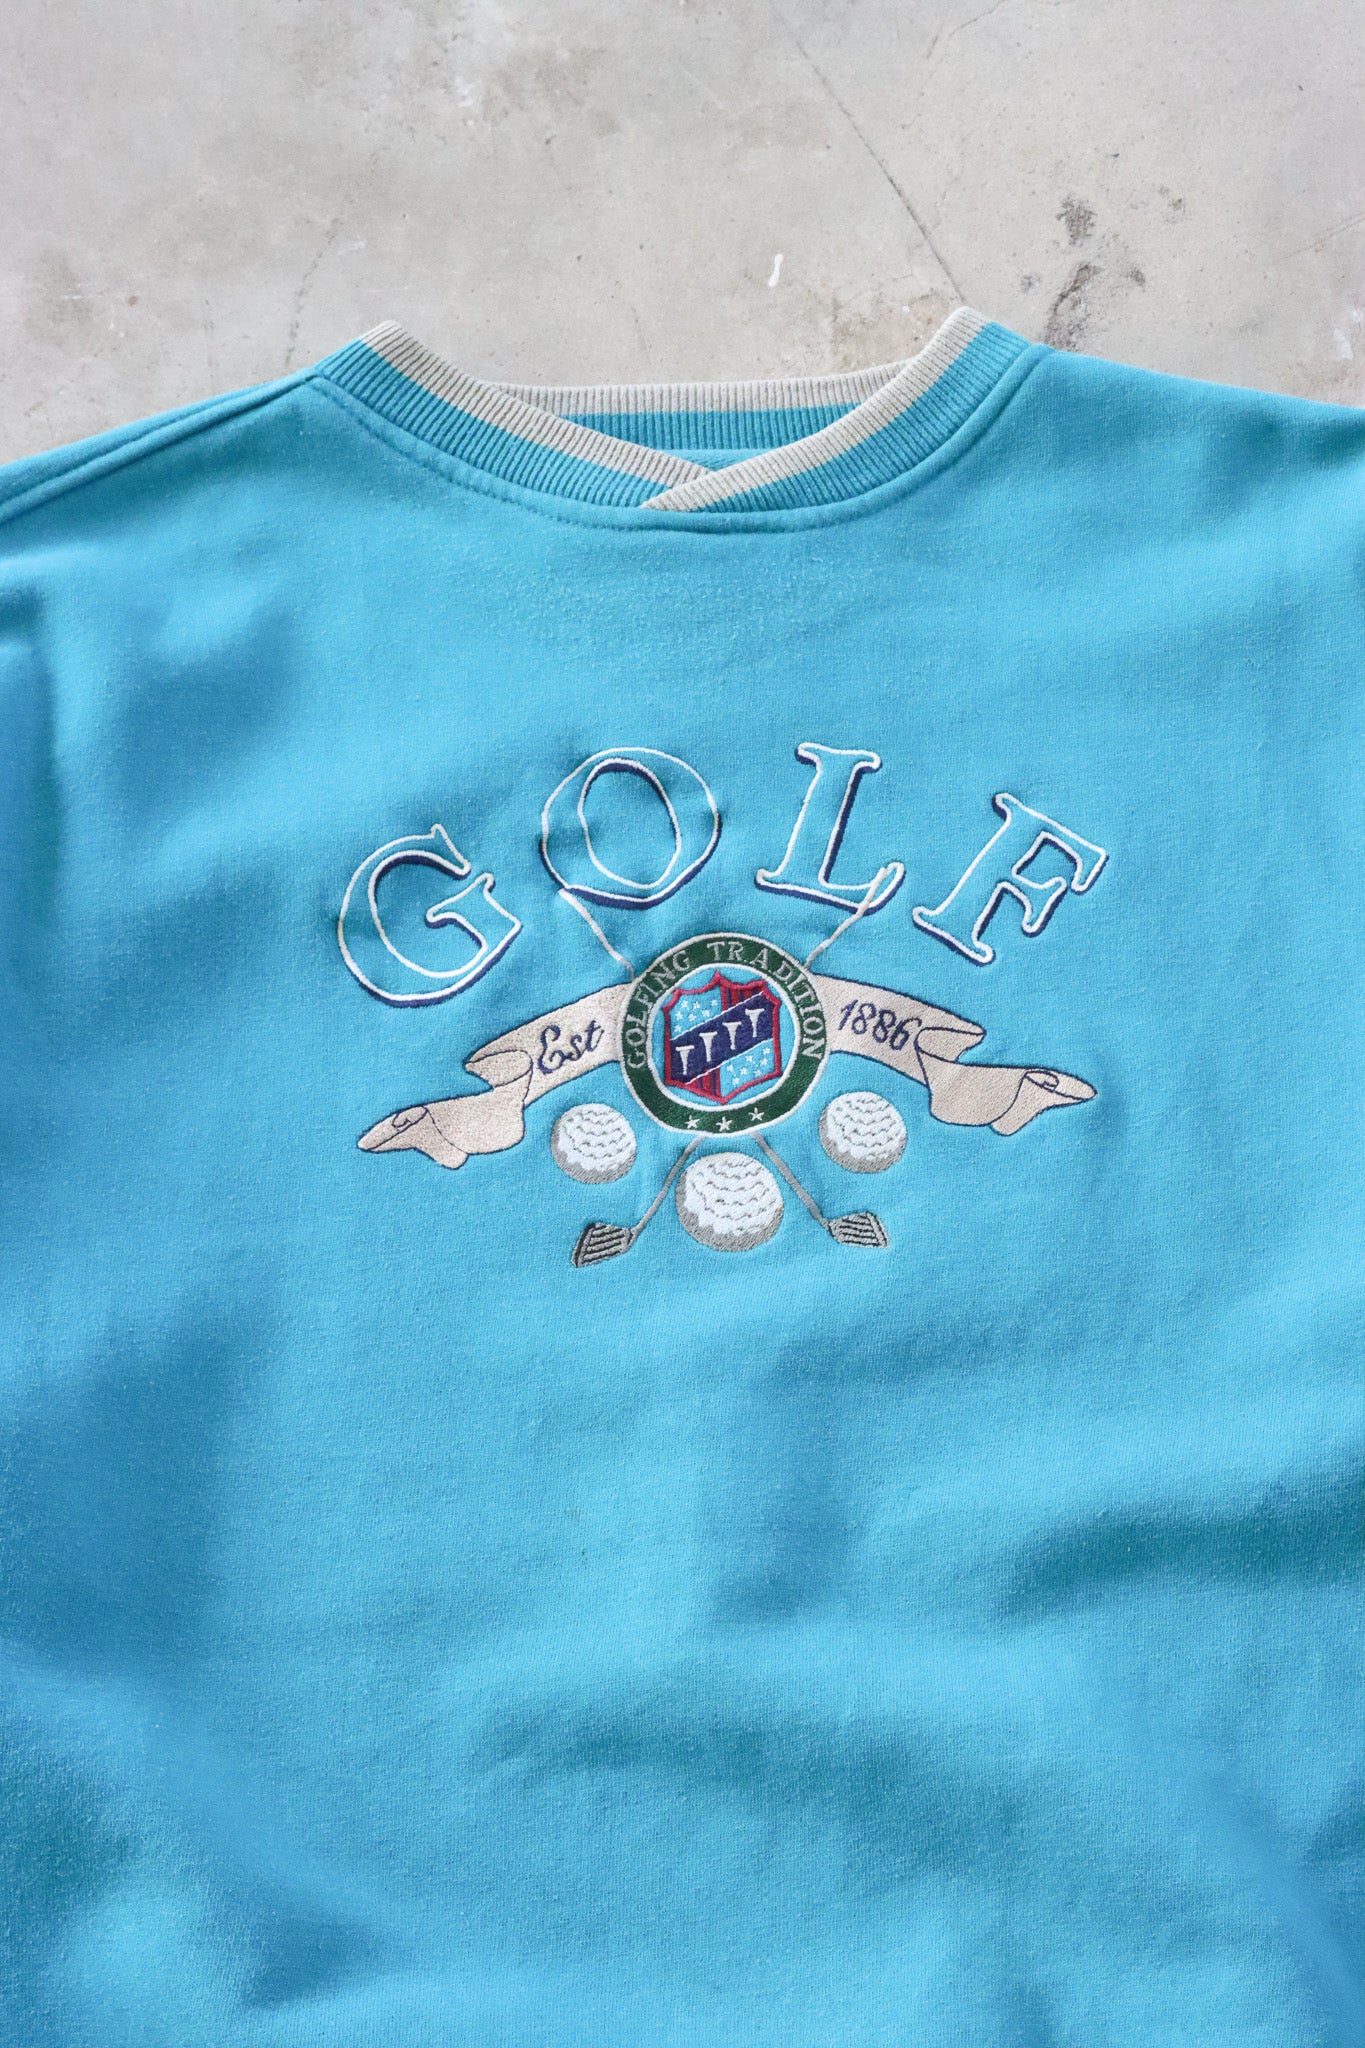 Vintage Golf Embroidered Sweater Large